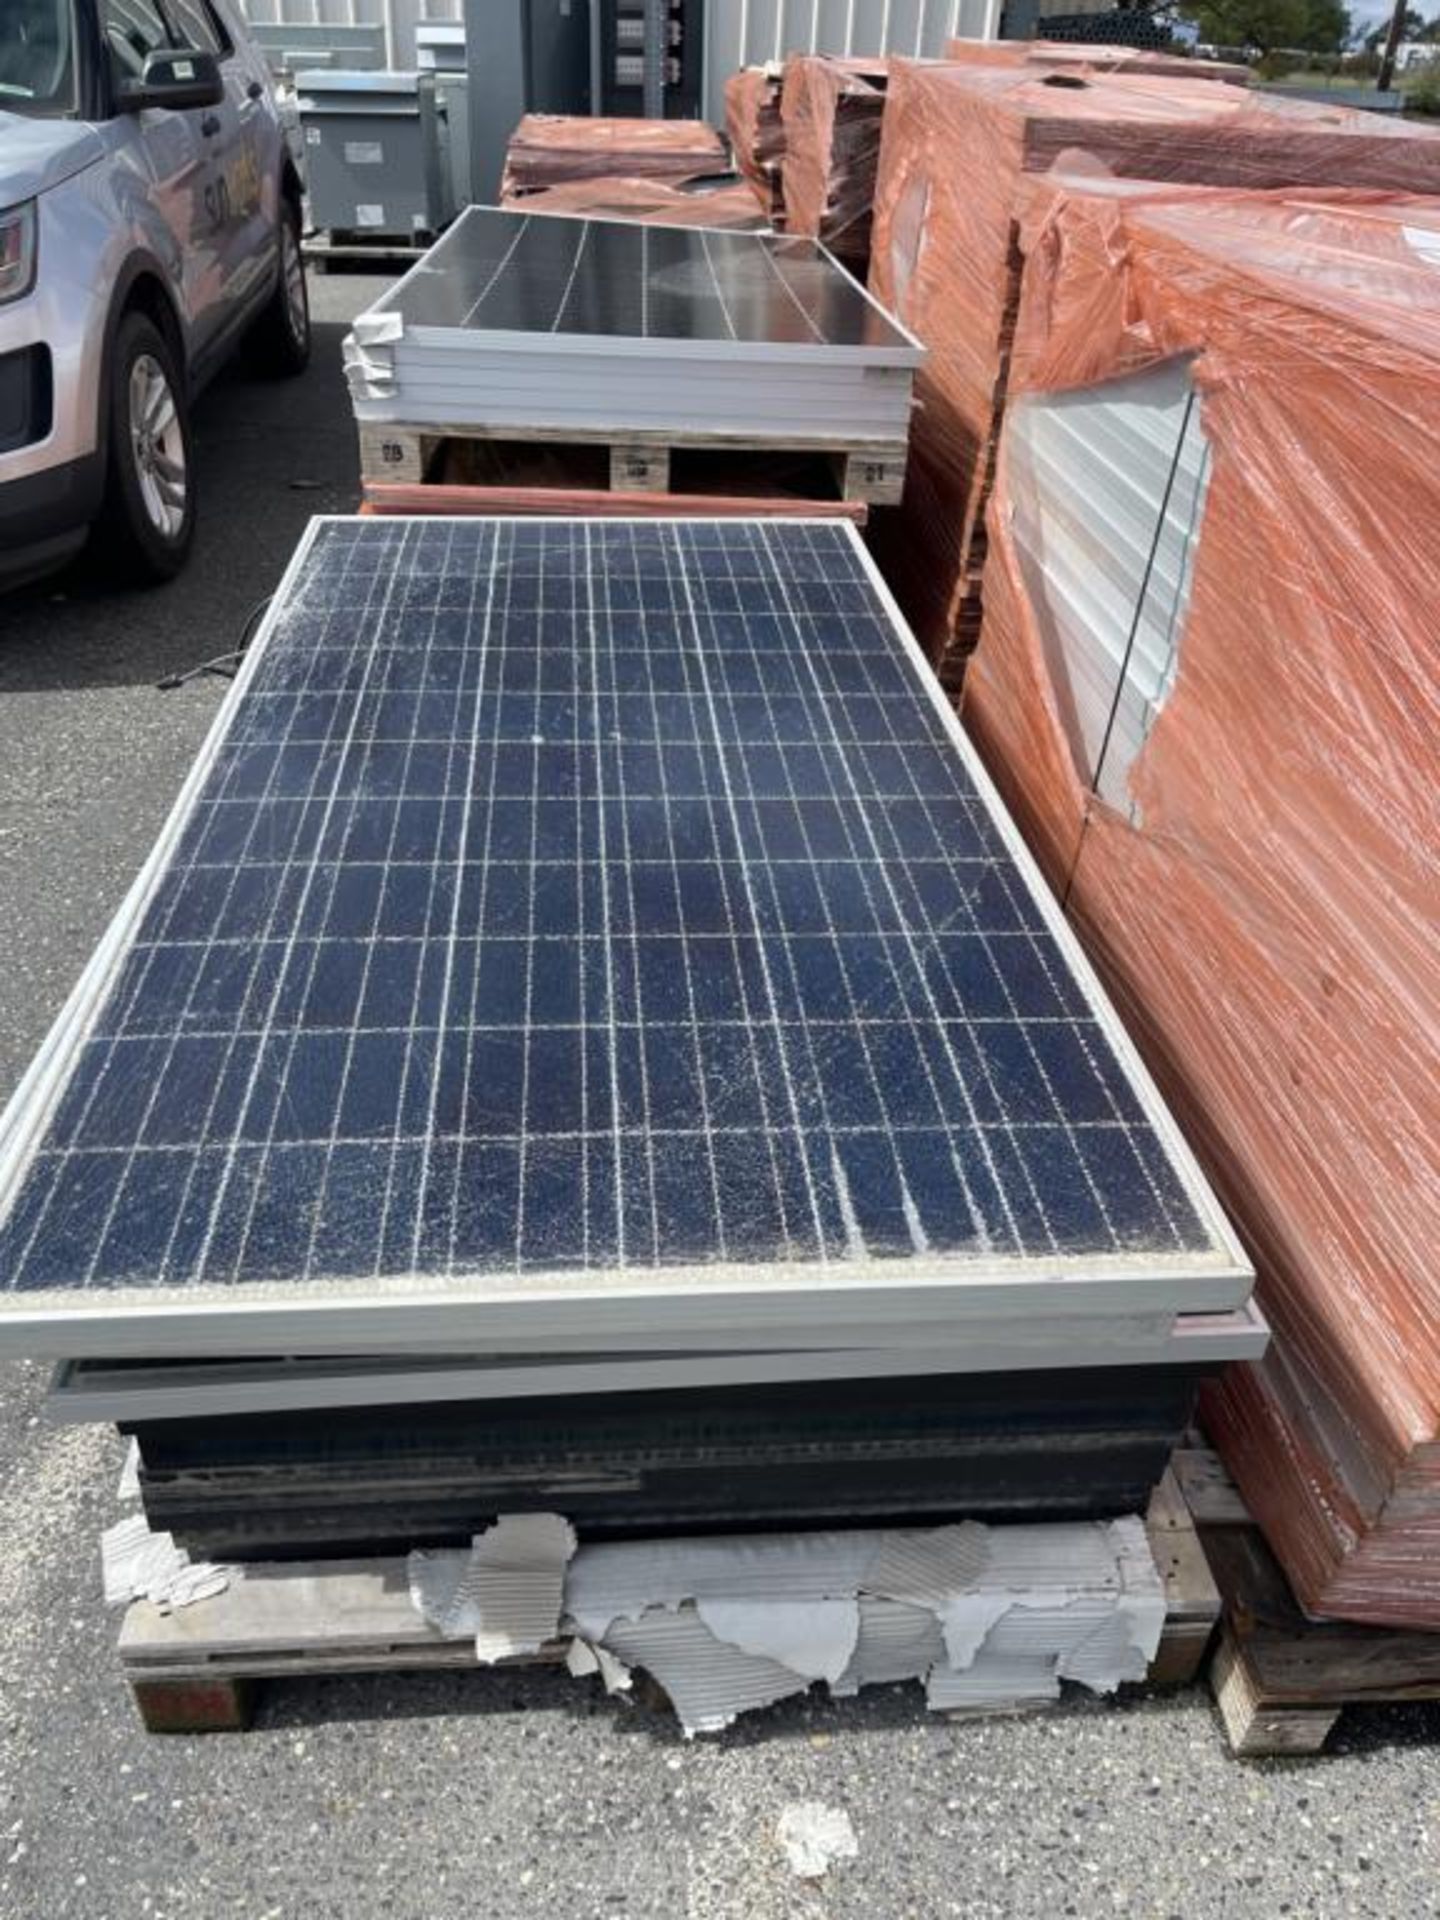 Scrap Electrical and Solar Panels - Image 4 of 8